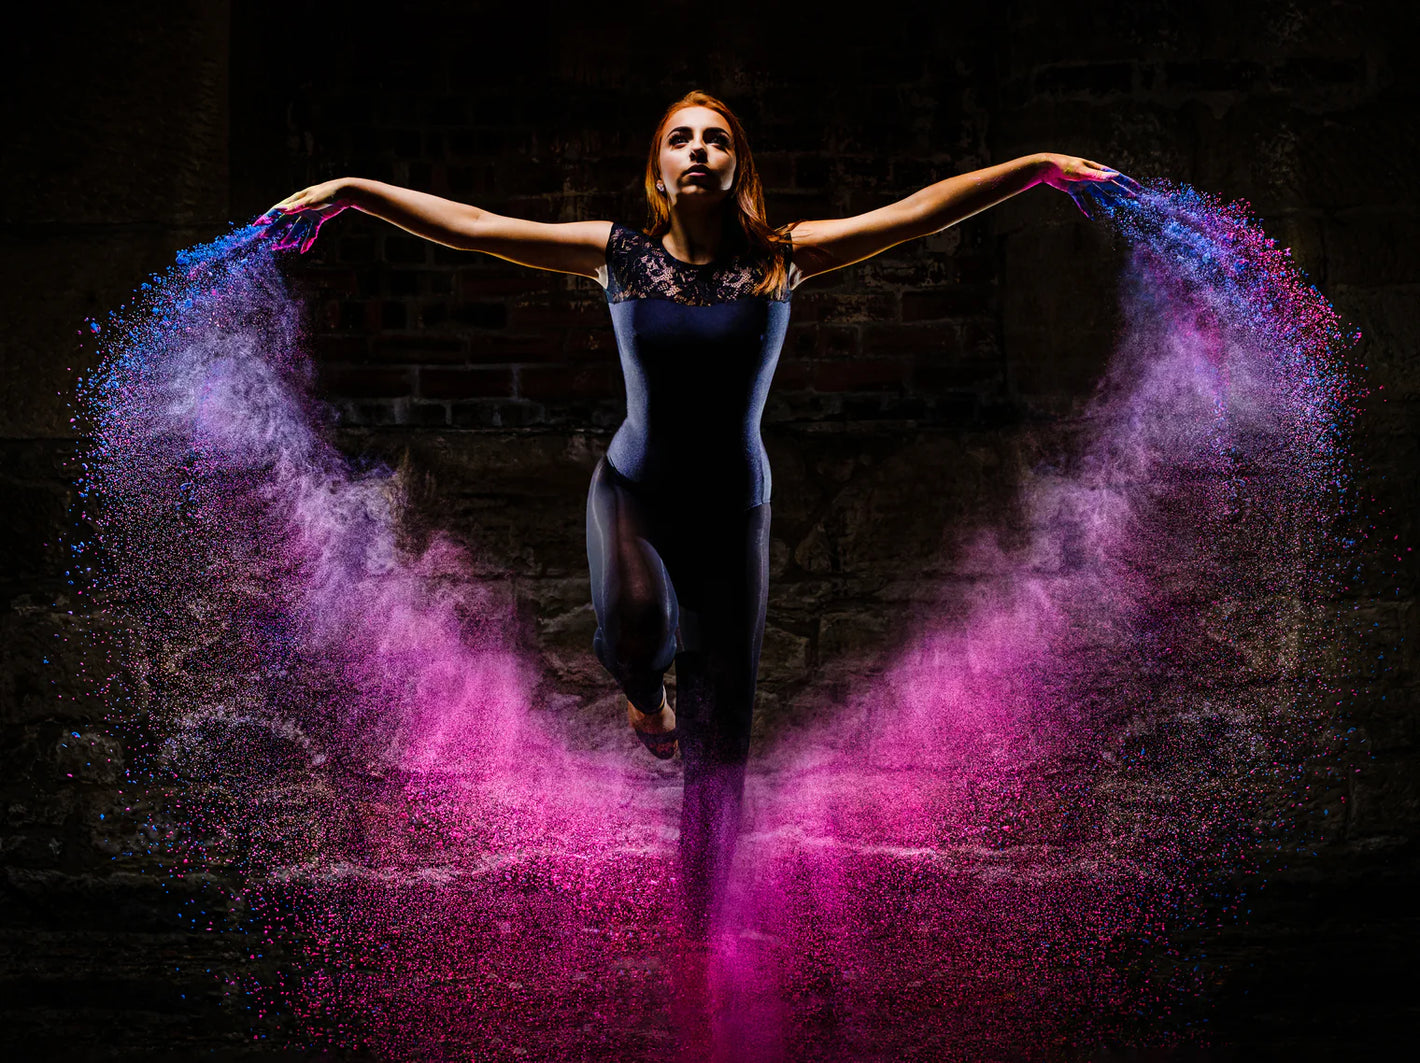 Photo of woman surrounded by colorful light, taken by photographer Kevin Wyllie